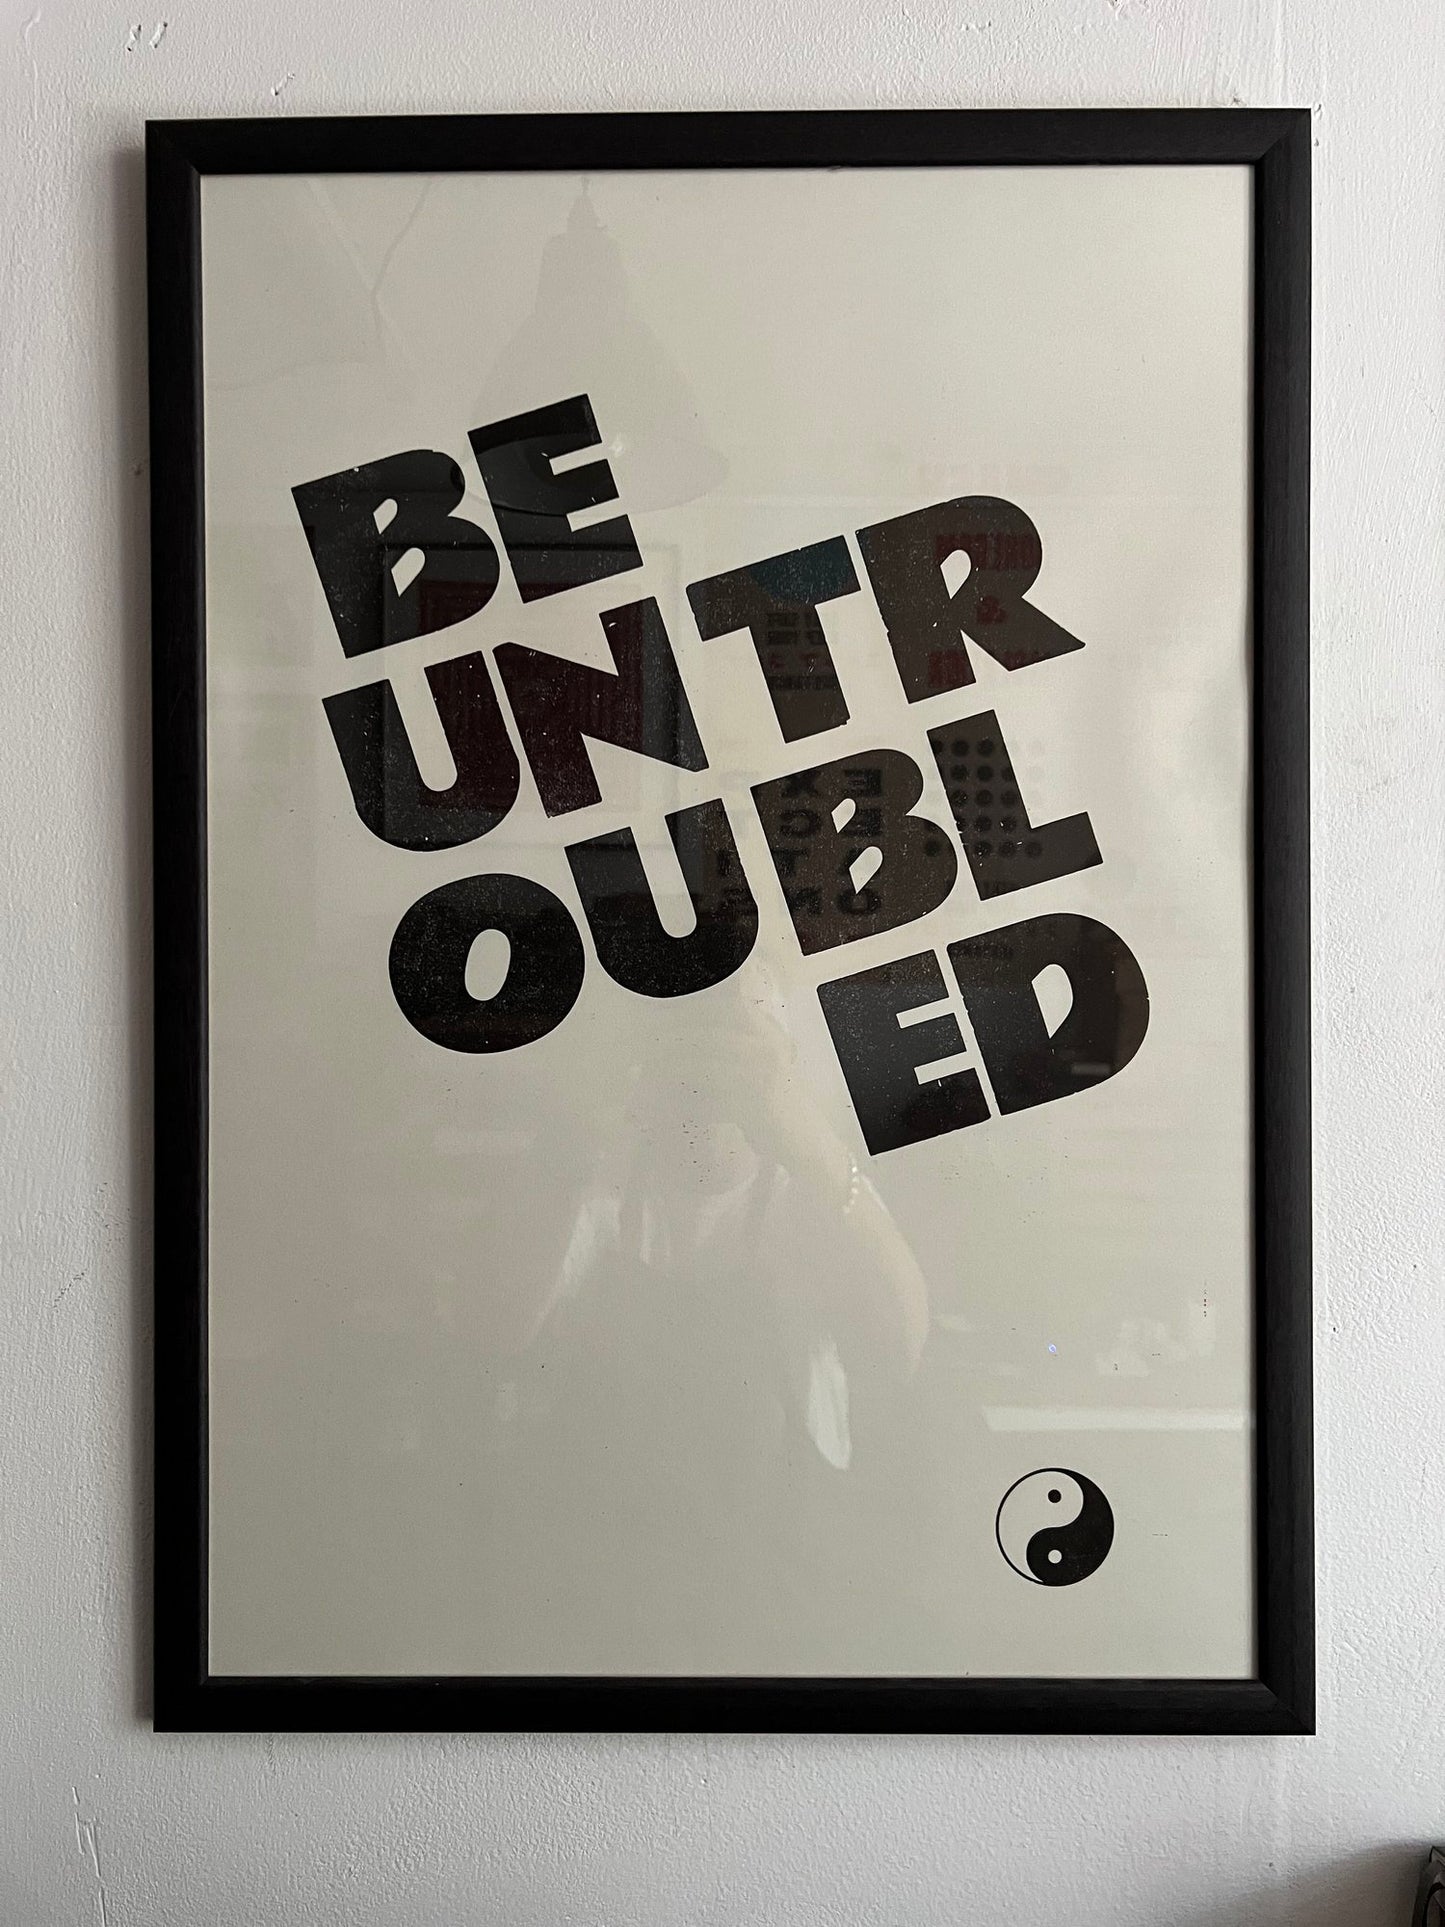 BE UNTROUBLED / Poster